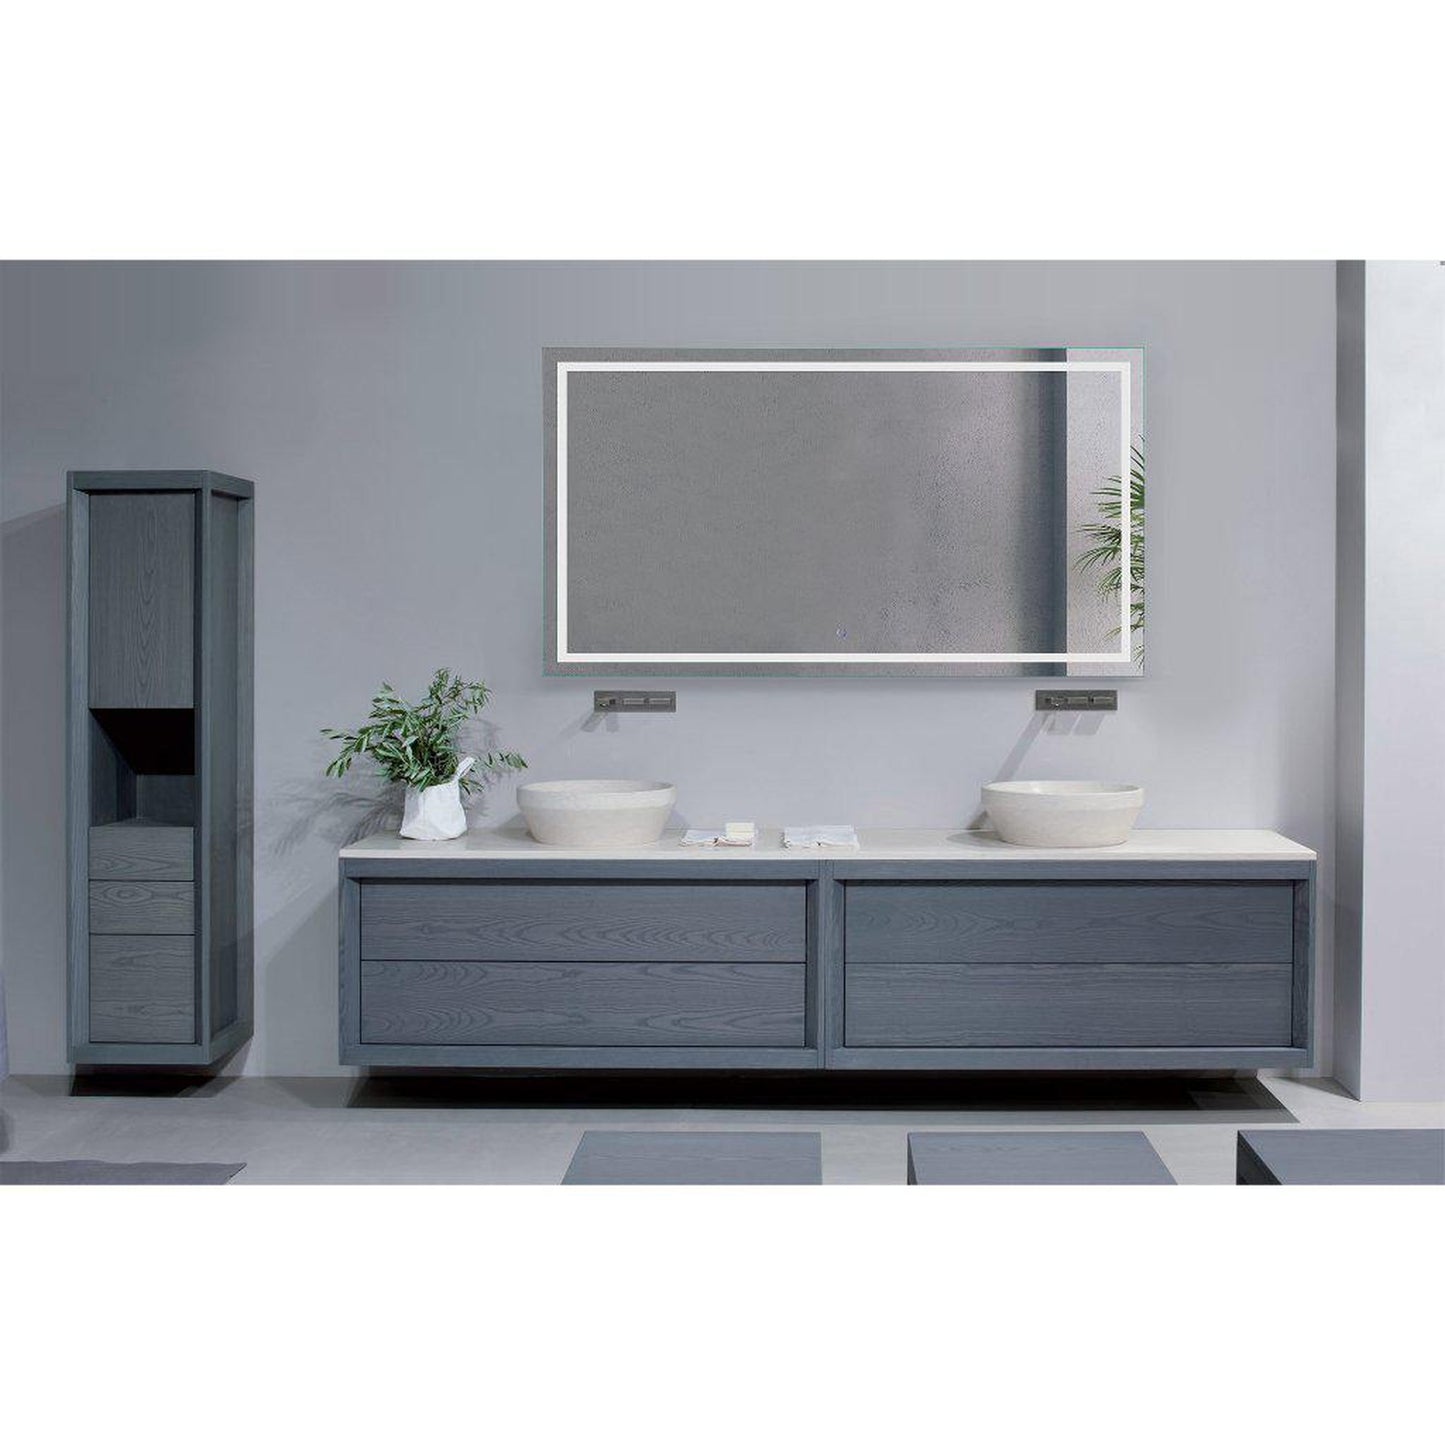 Krugg Reflections Icon 66” x 36” 5000K Rectangular Wall-Mounted Illuminated Silver Backed LED Mirror With Built-in Defogger and Touch Sensor On/Off Built-in Dimmer